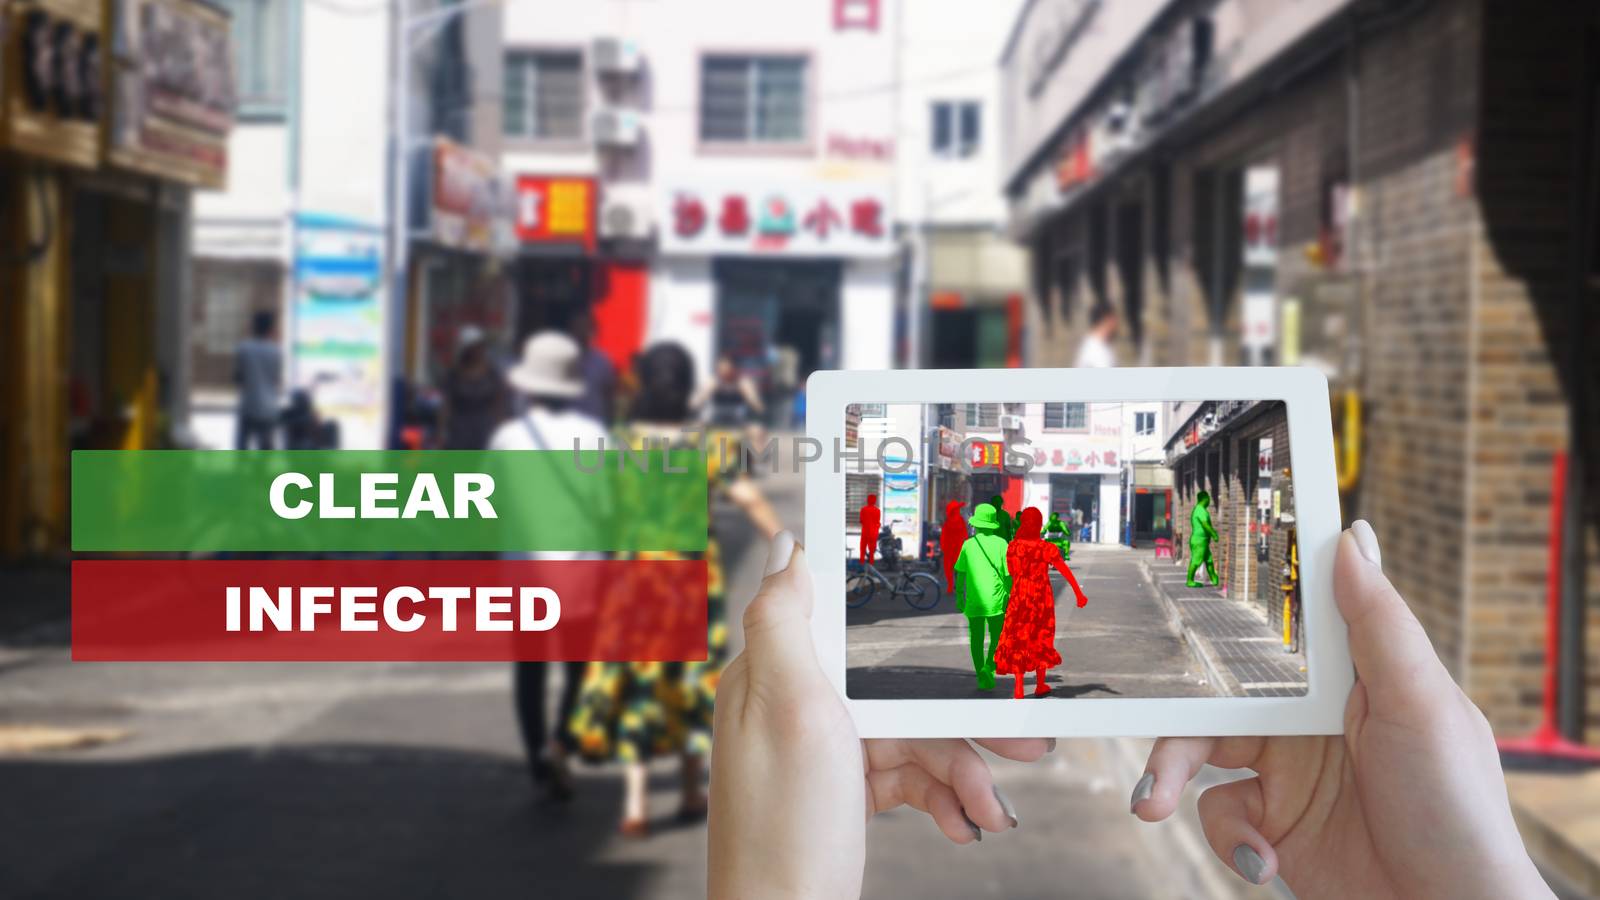 Augmented Reality Application. Disease scanner. Coronavirus in China. Search for dangerous viruses